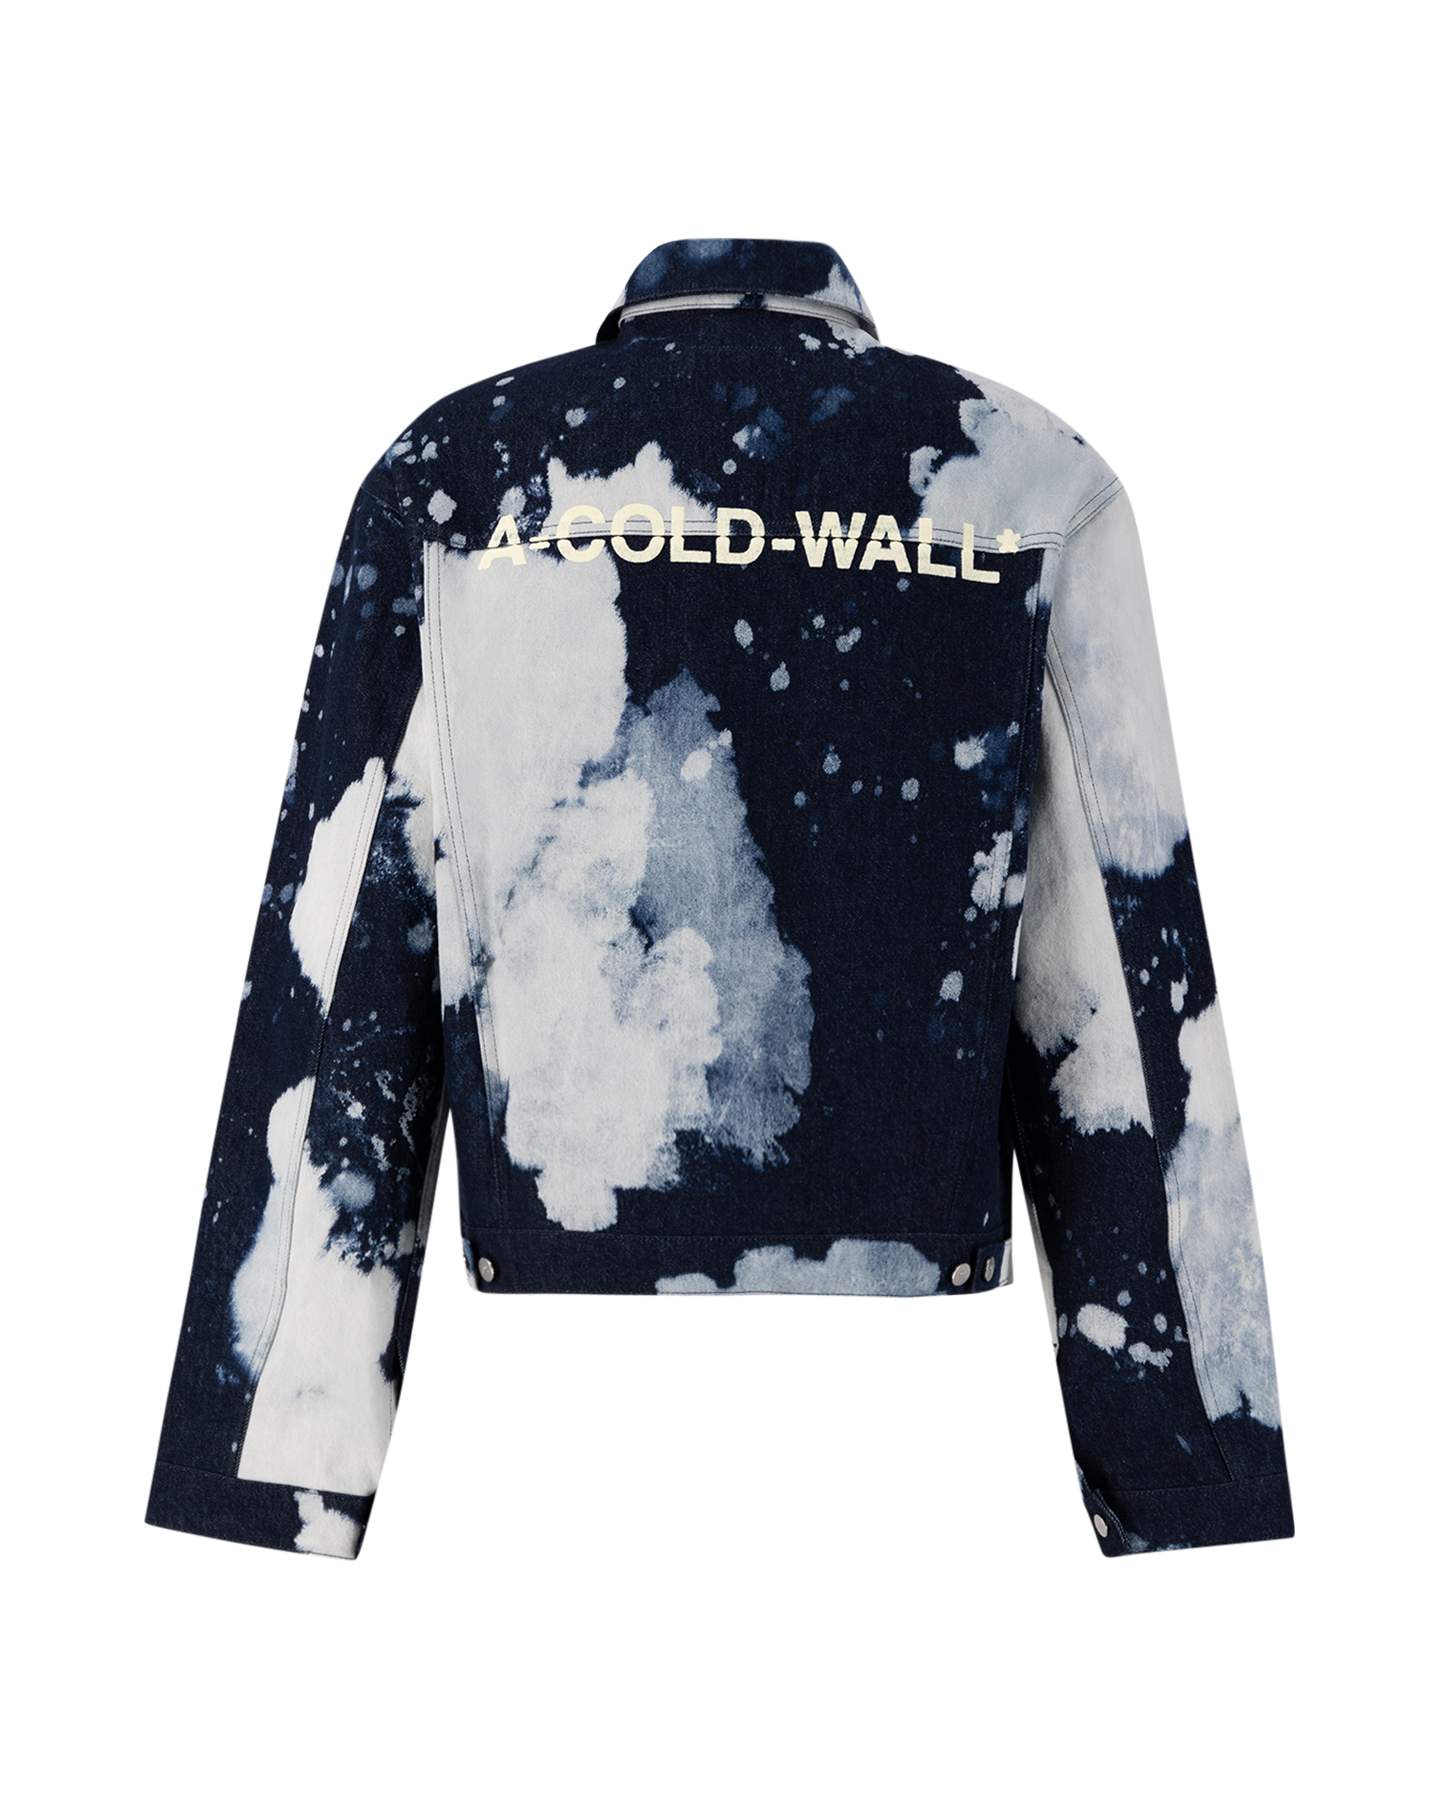 A-COLD-WALL* Hand Bleached Denim Jacket BLACK 2